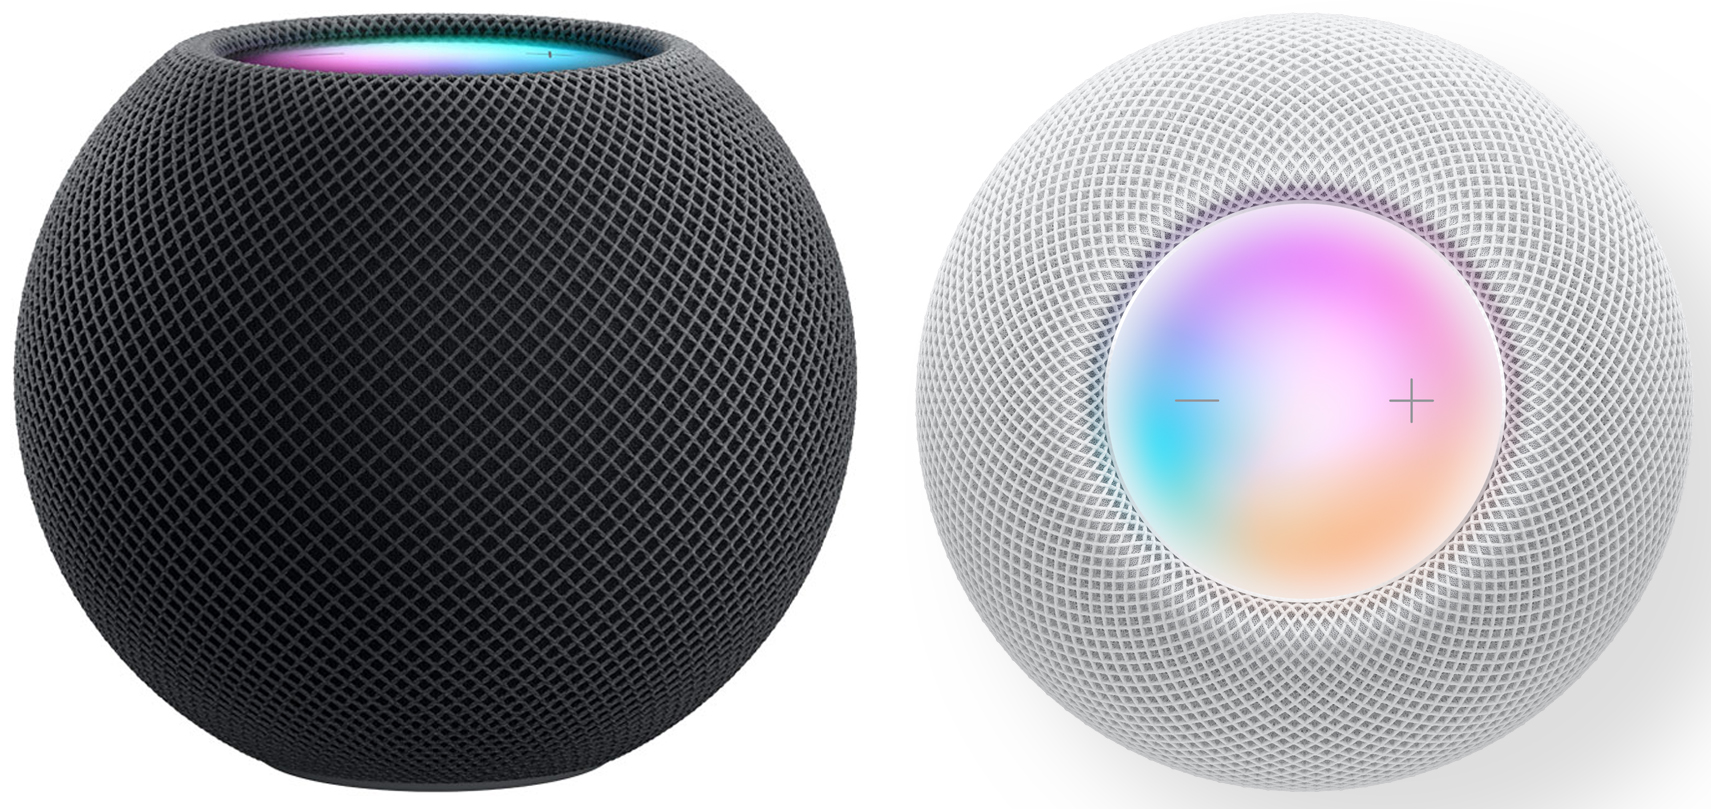 All the top features from Apple’s new HomePod mini